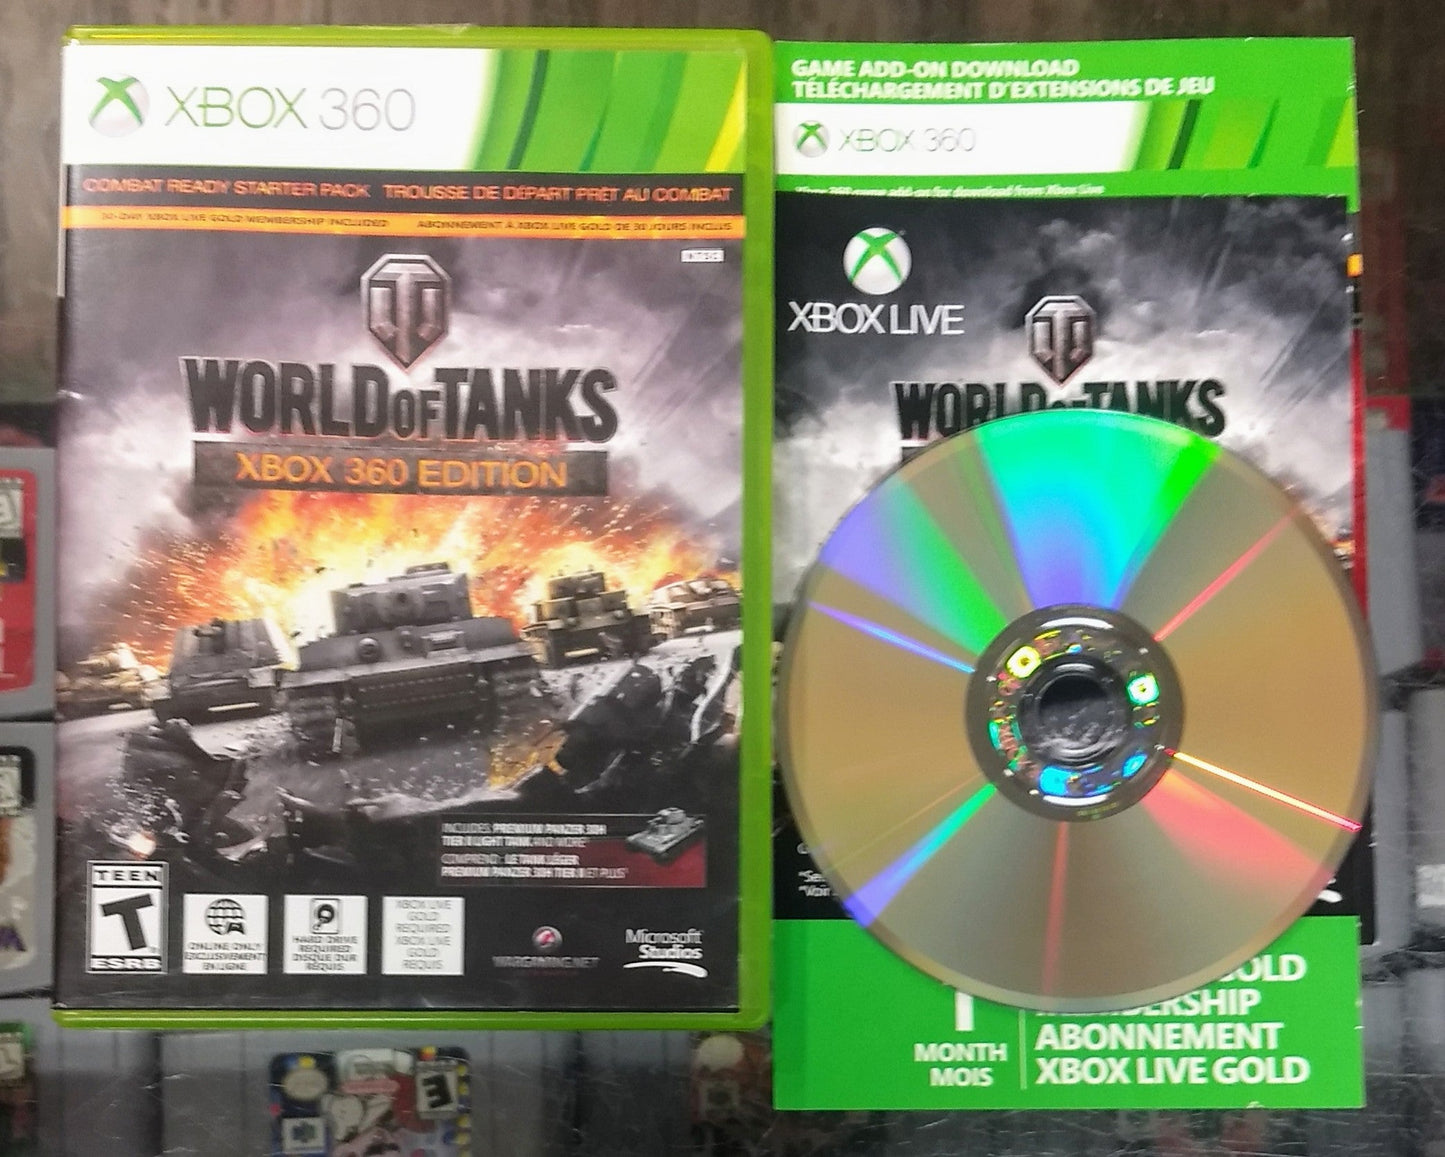 WORLD OF TANKS (XBOX 360 X360) - jeux video game-x